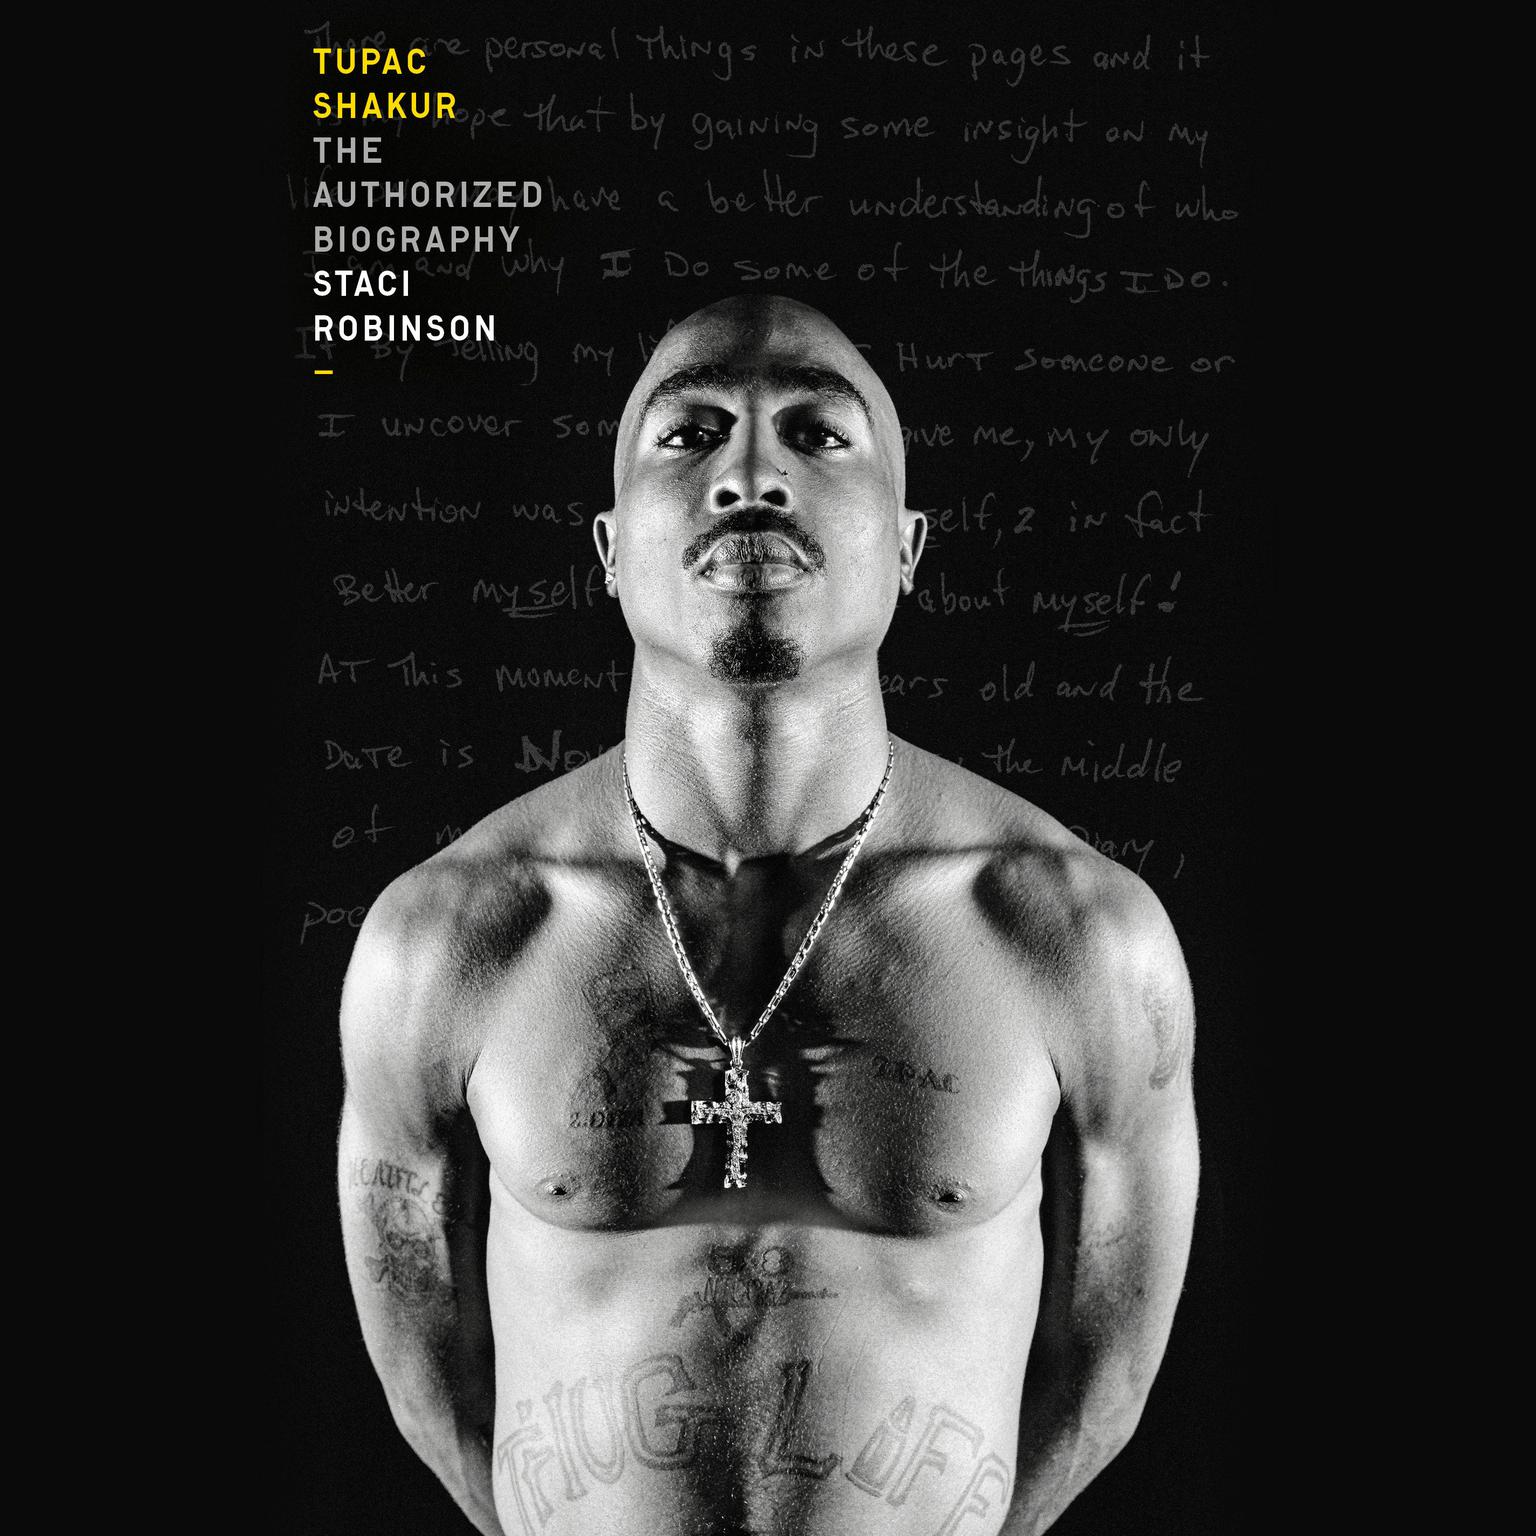 Tupac Shakur: The Authorized Biography Audiobook, by Staci Robinson